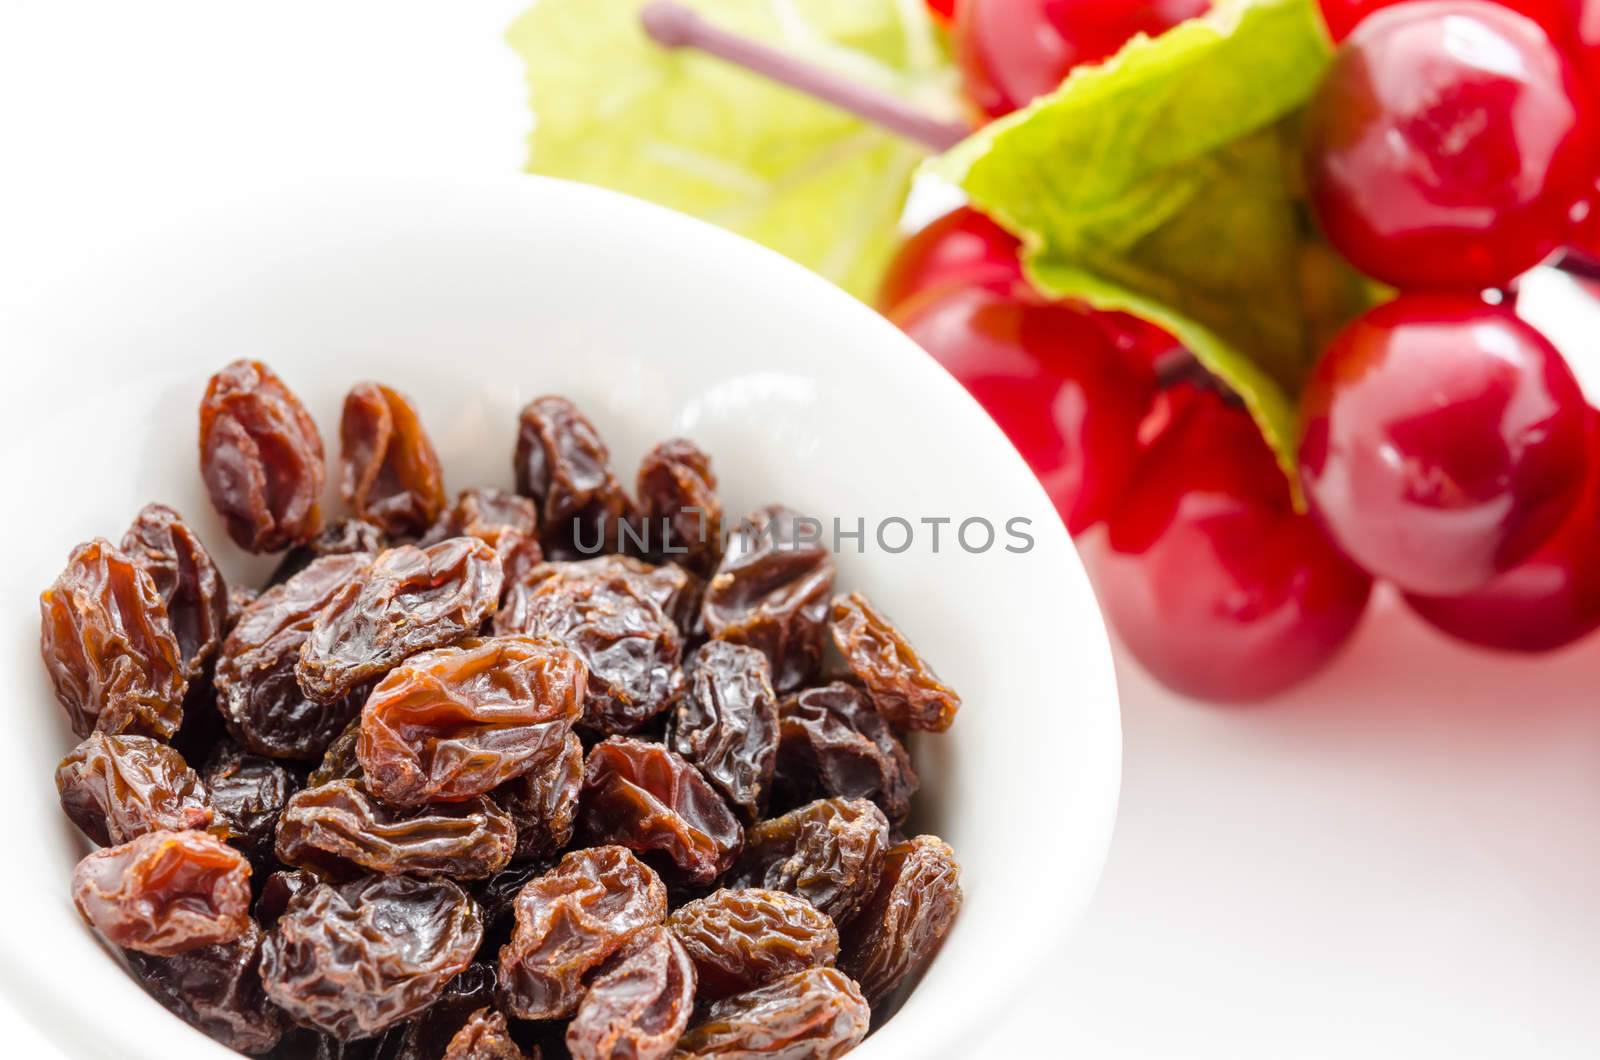 Raisins in bowl with red grapes on white background close up